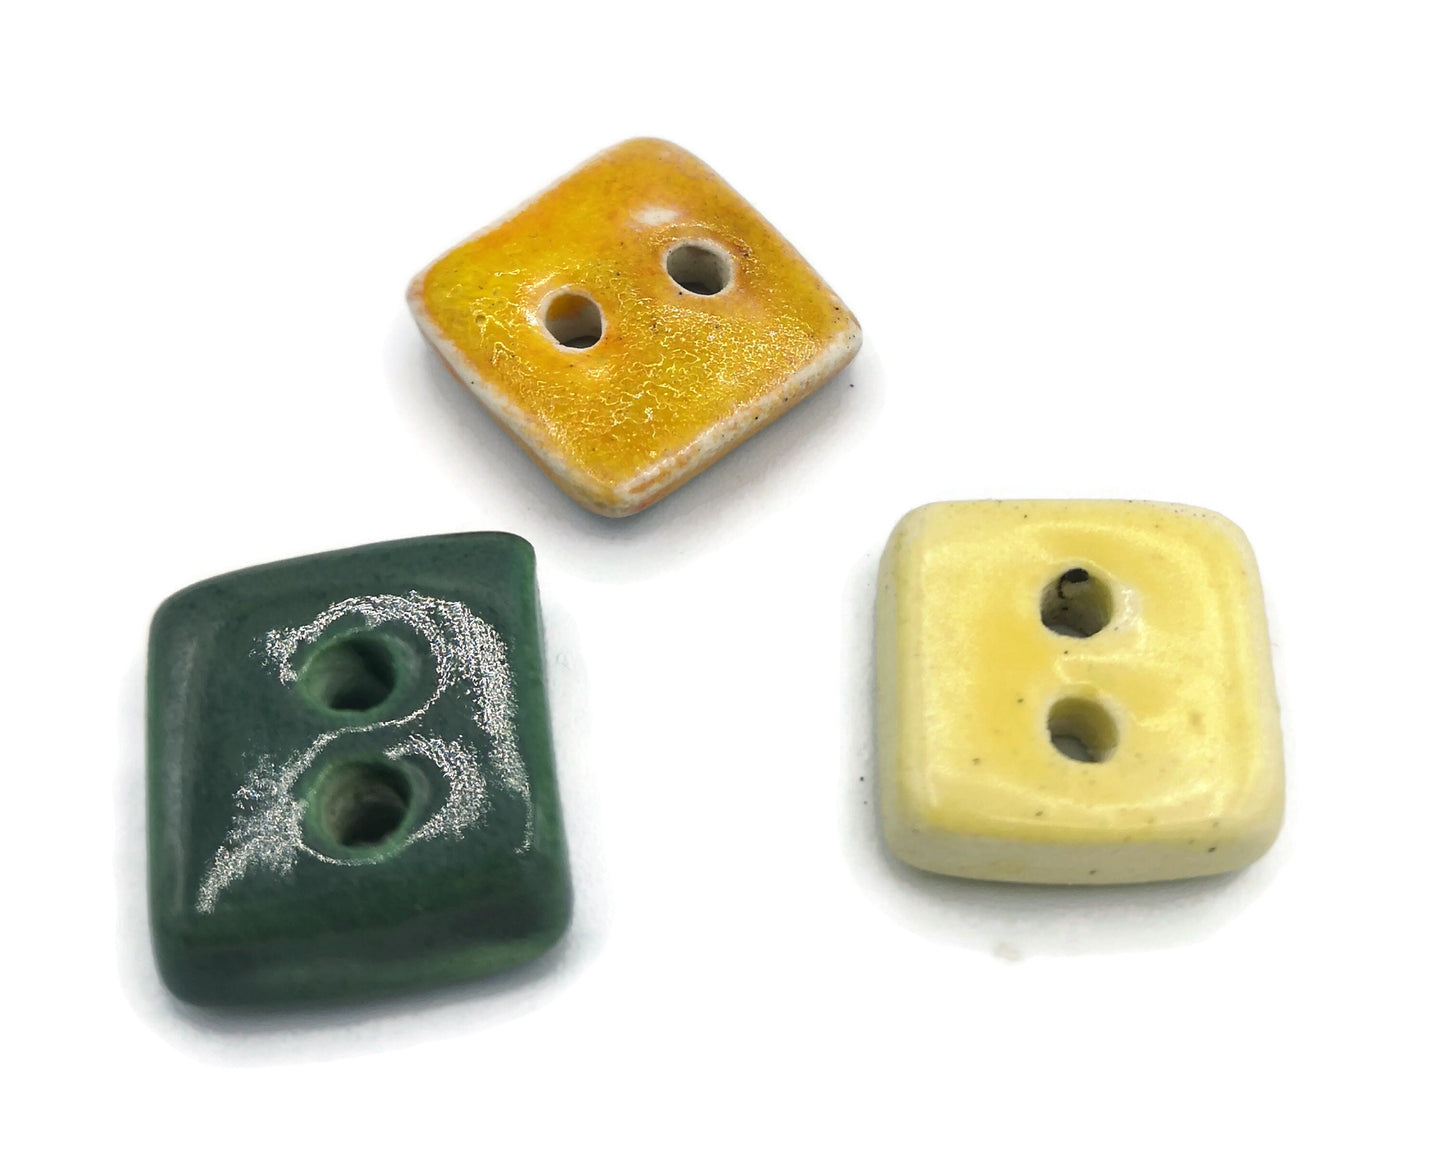 3Pc Handmade Ceramic Square Sewing Buttons, Best Sellers Sewing Supplies And Notions, Artisan Coat Buttons, Novelty Unique Craft Supplies - Ceramica Ana Rafael